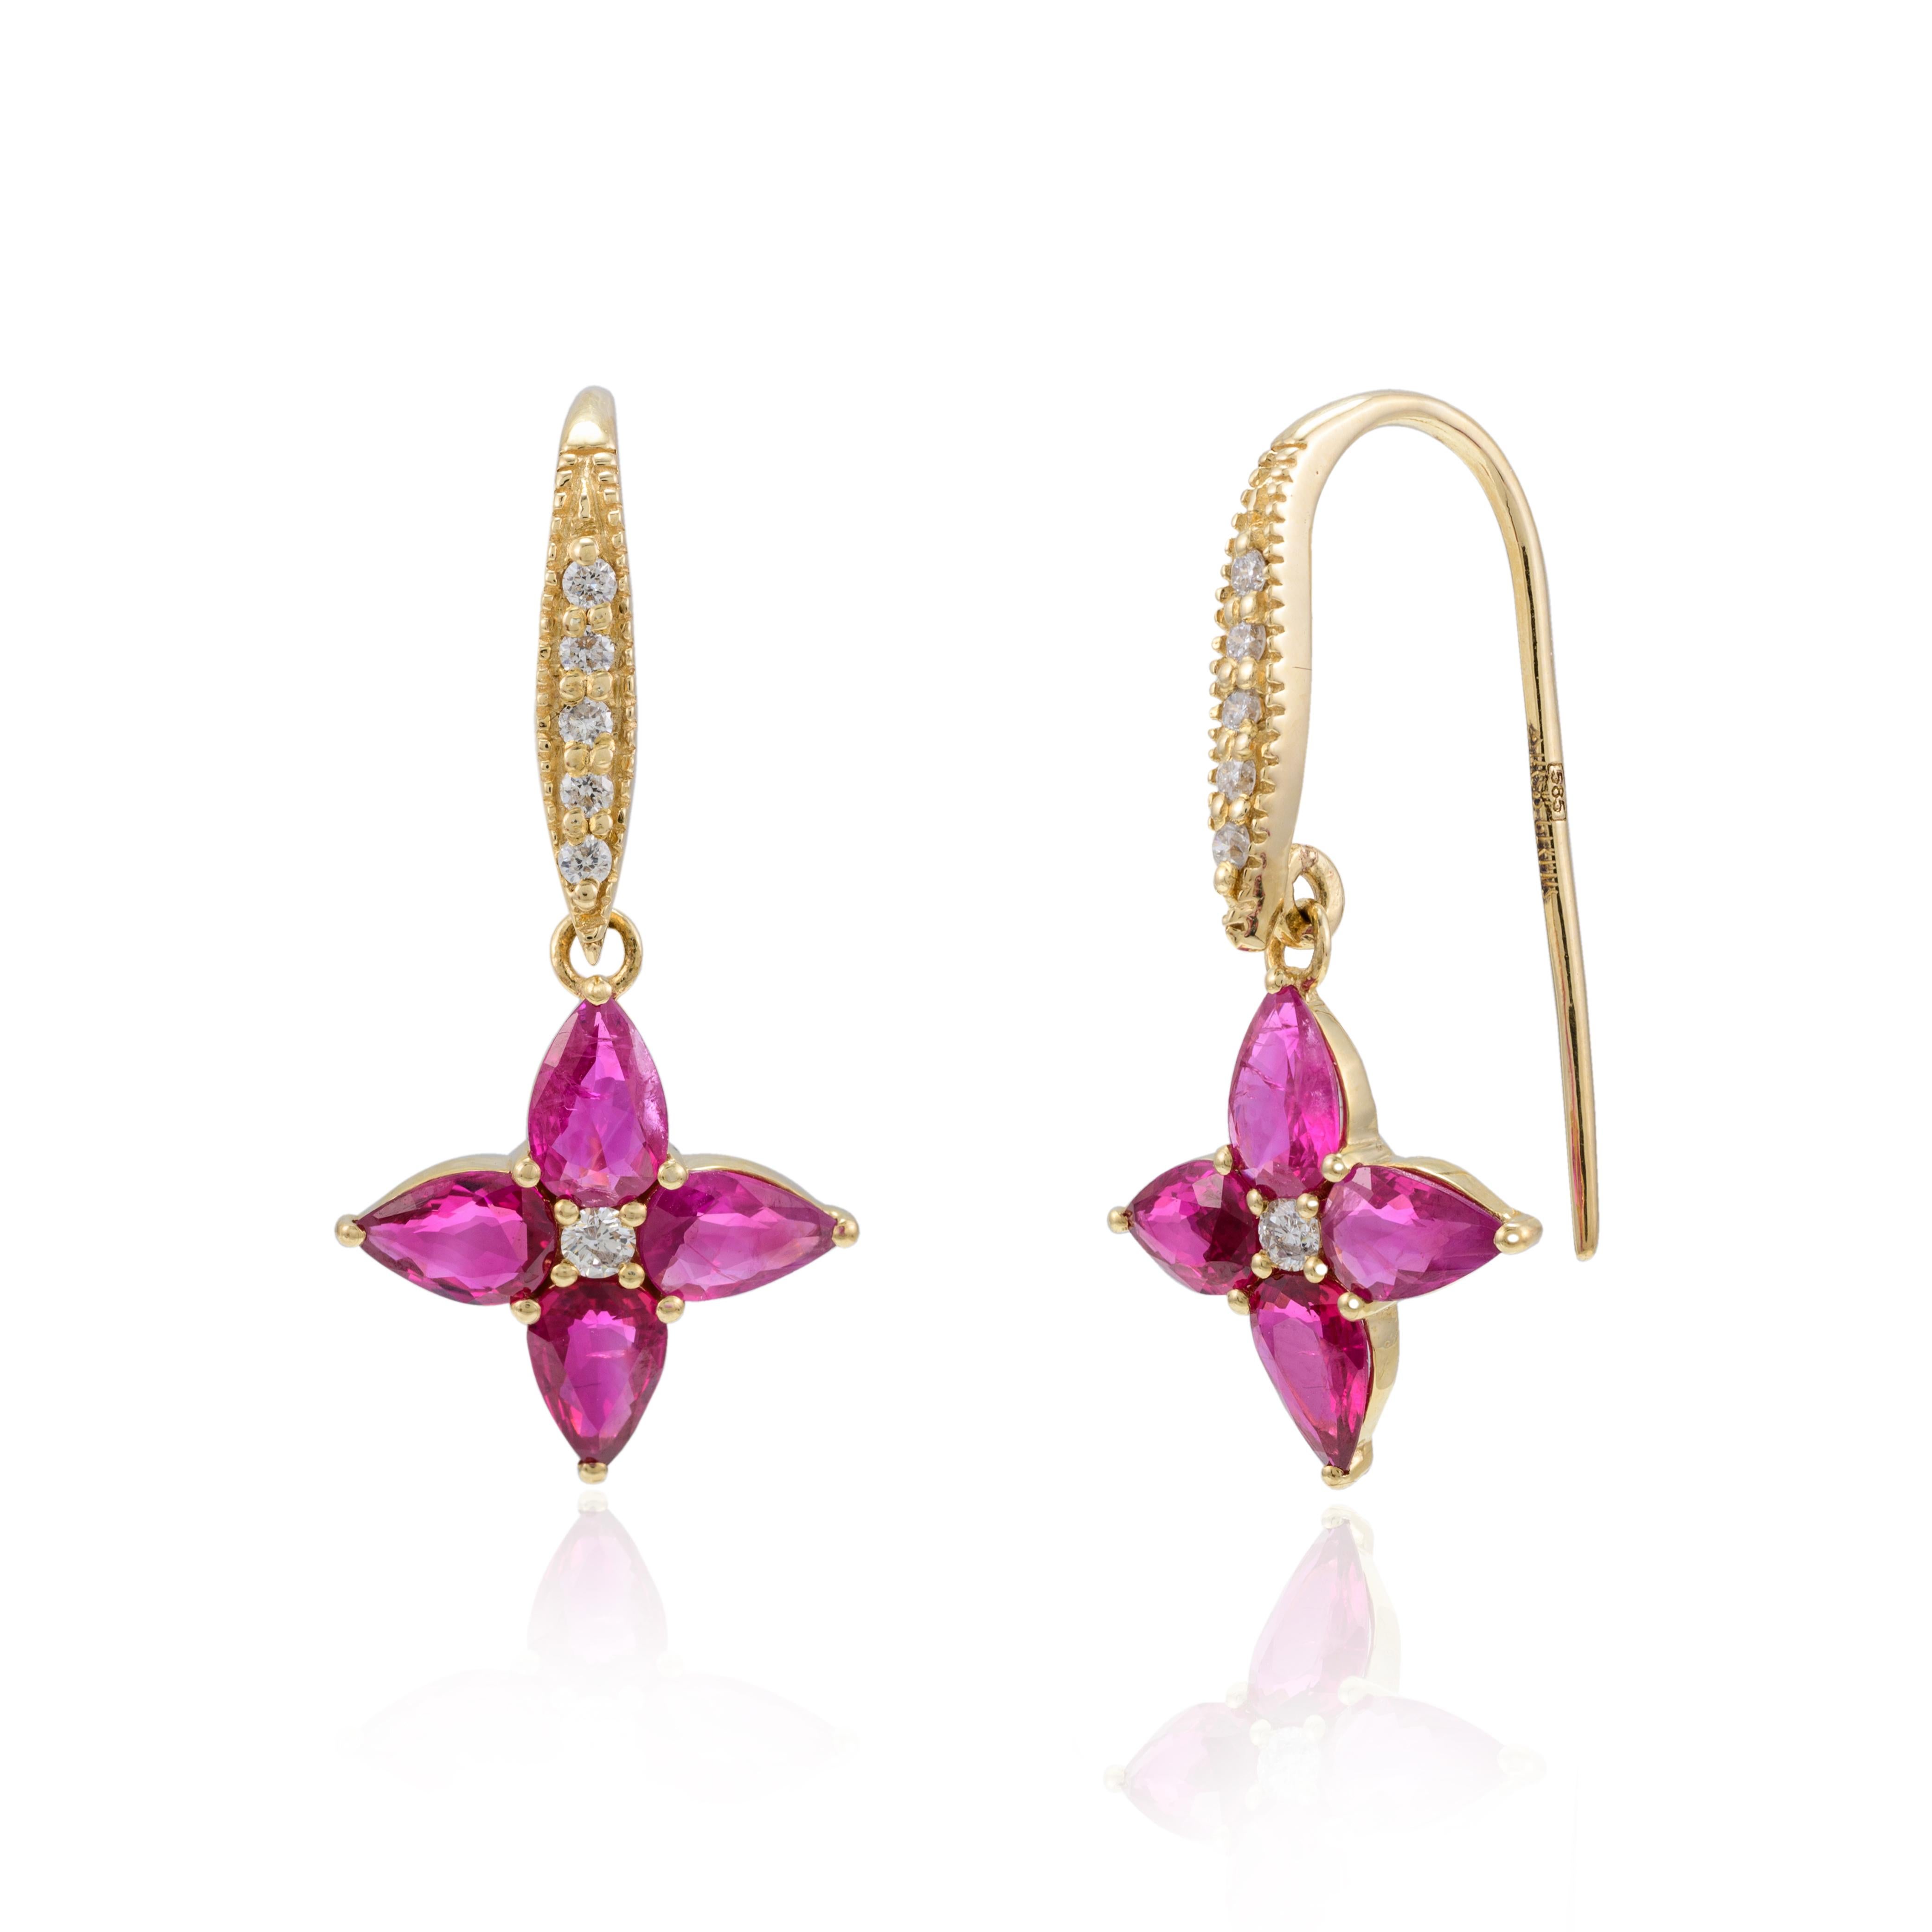 Contemporary Ruby Flower Drop Earrings 14k Solid Yellow Gold Gift for Her For Sale